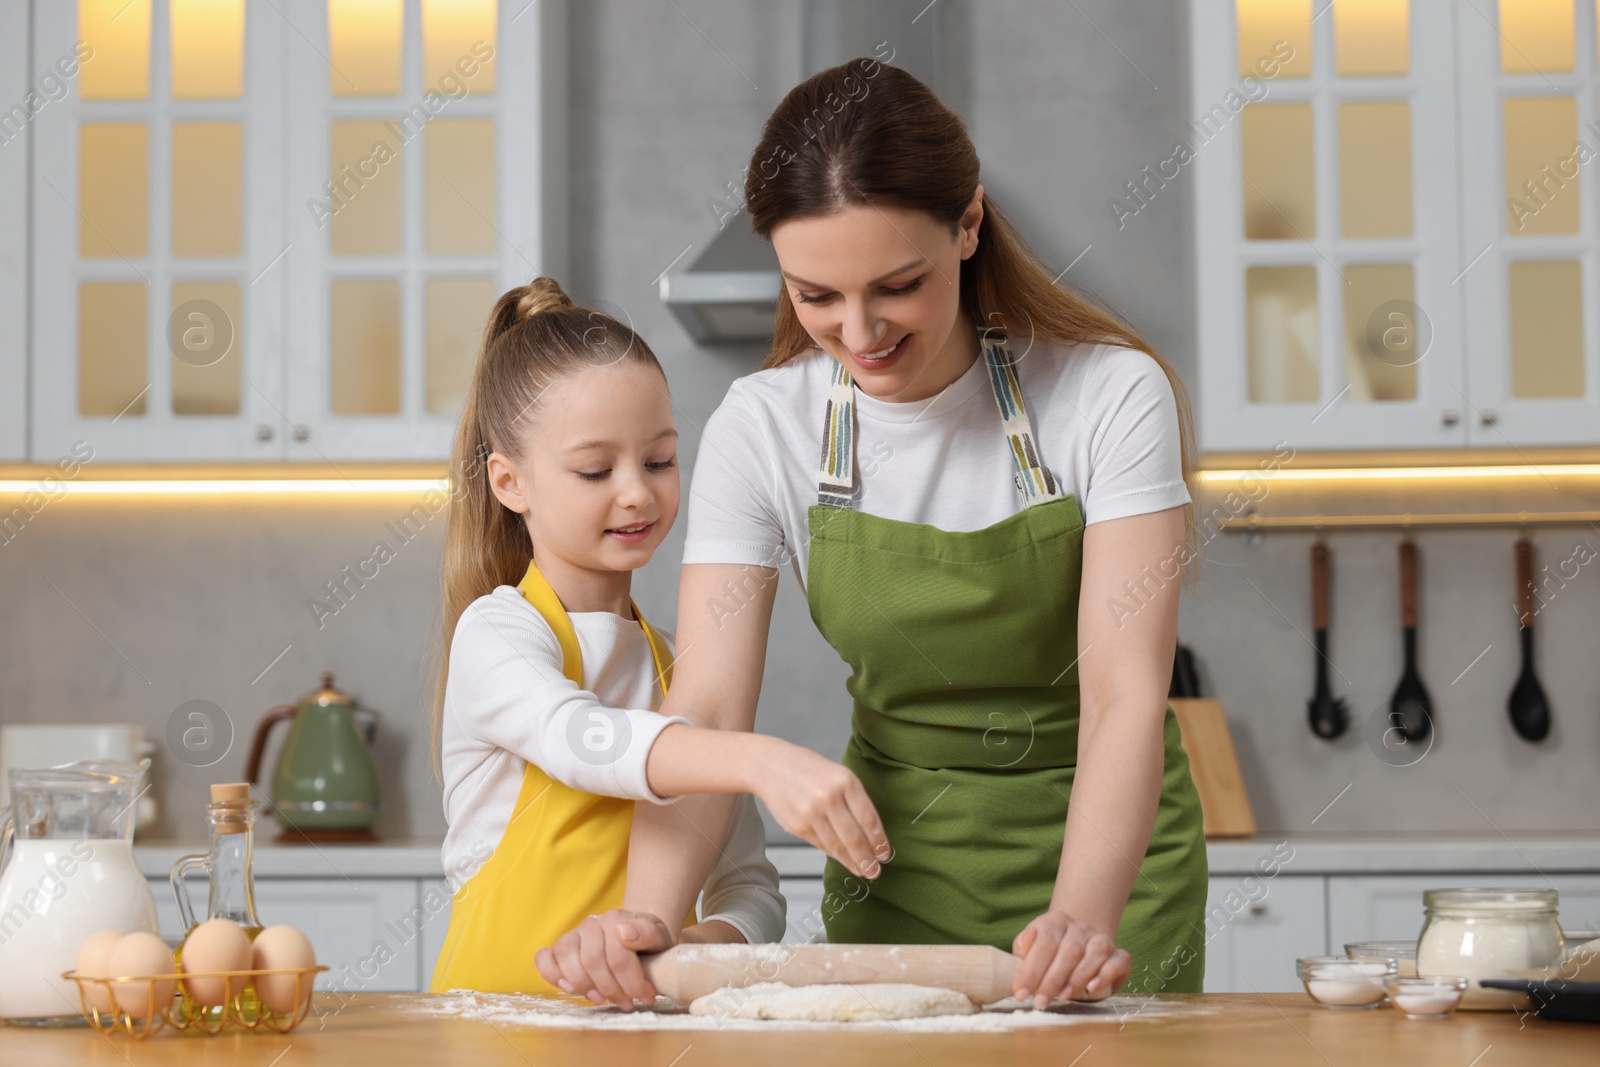 Photo of Making bread. Mother and her daughter rolling dough at wooden table in kitchen